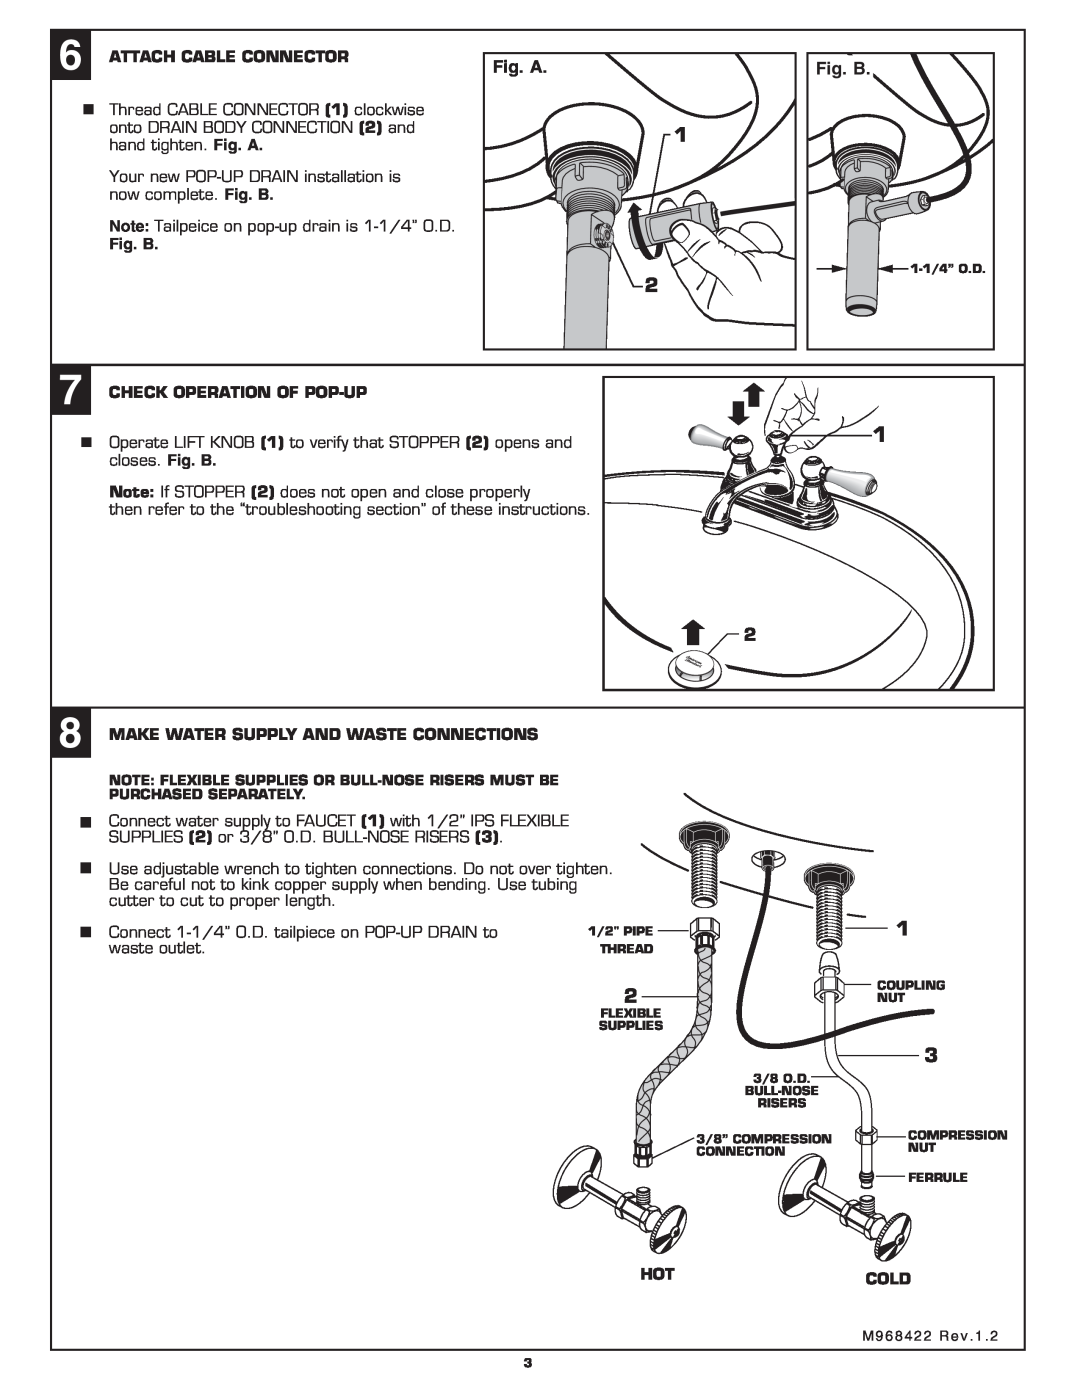 American Standard 2804 Attach Cable Connector, Fig. B, Check Operation Of Pop-Up, Make Water Supply And Waste Connections 